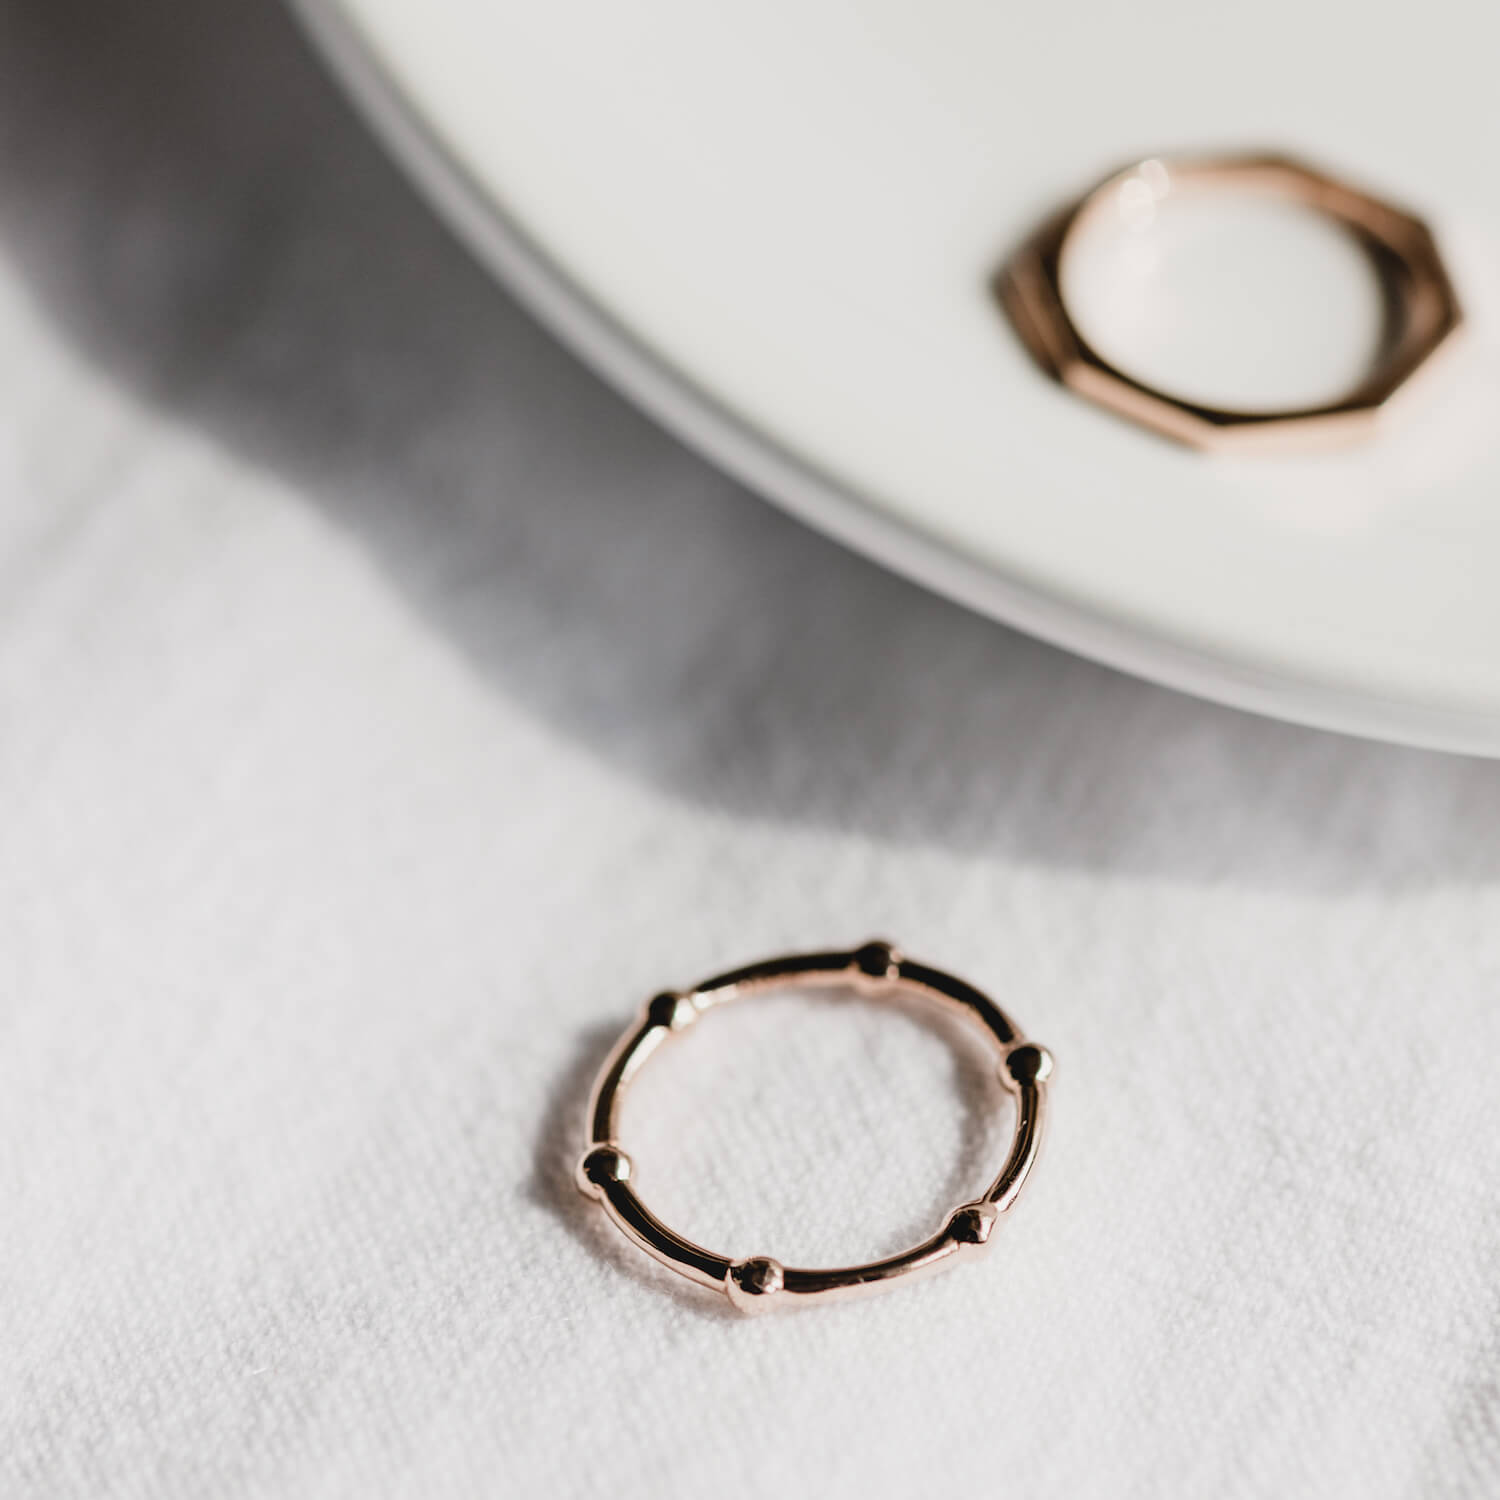 A rose gold ring made from beaded wire and a rose gold hexagonal shaped ring